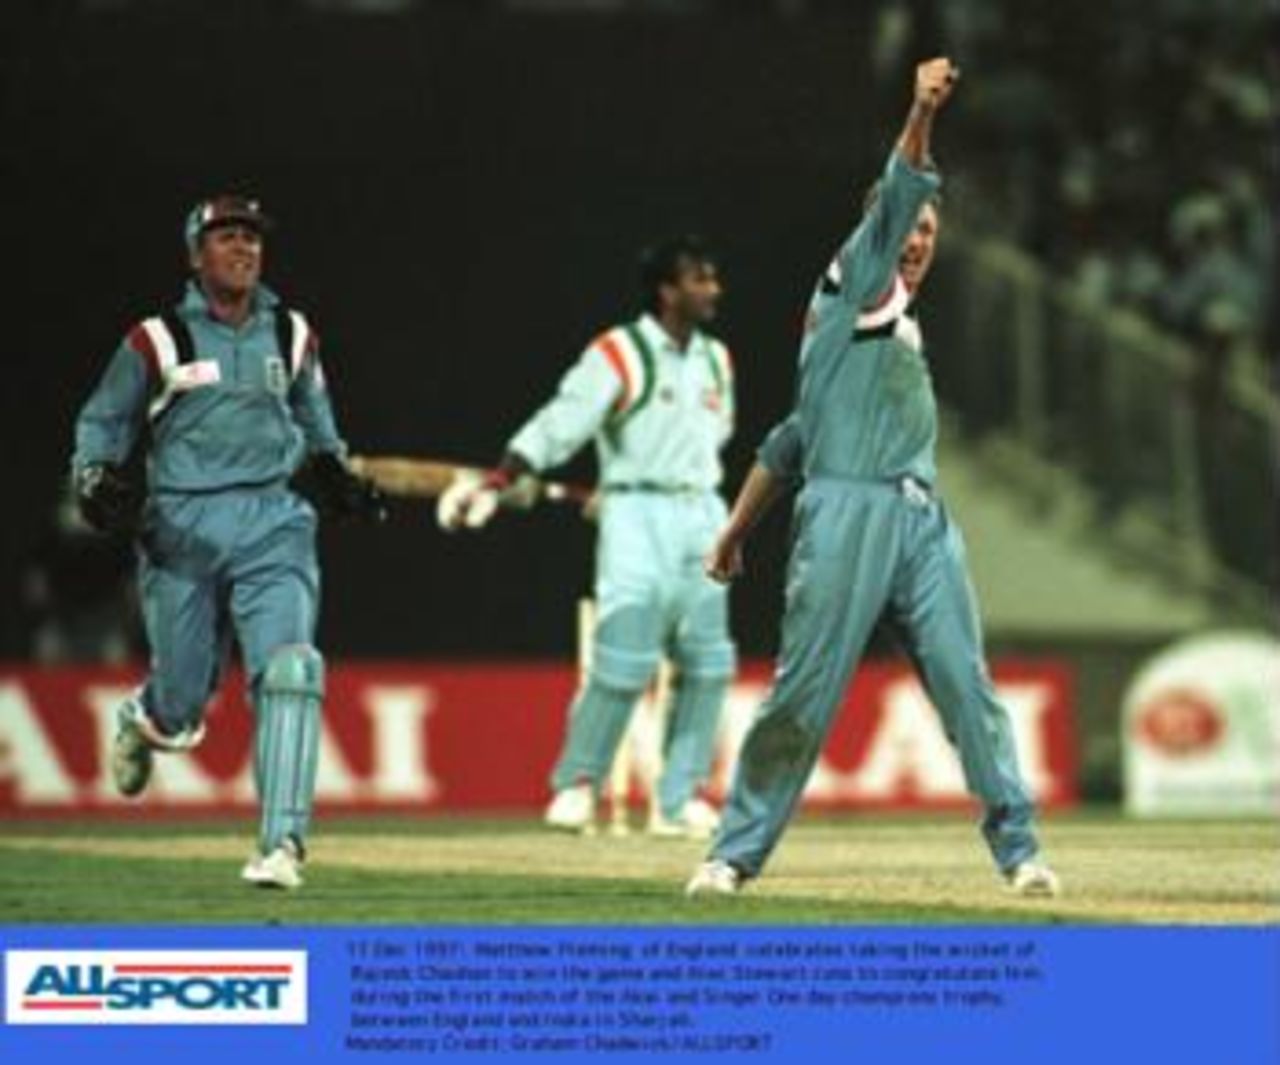 Champion's trophy, December 1997. England v India, 11 Dec 1997: Fleming dismisses Chauhan to end the game as Stewart runs to congratulate him